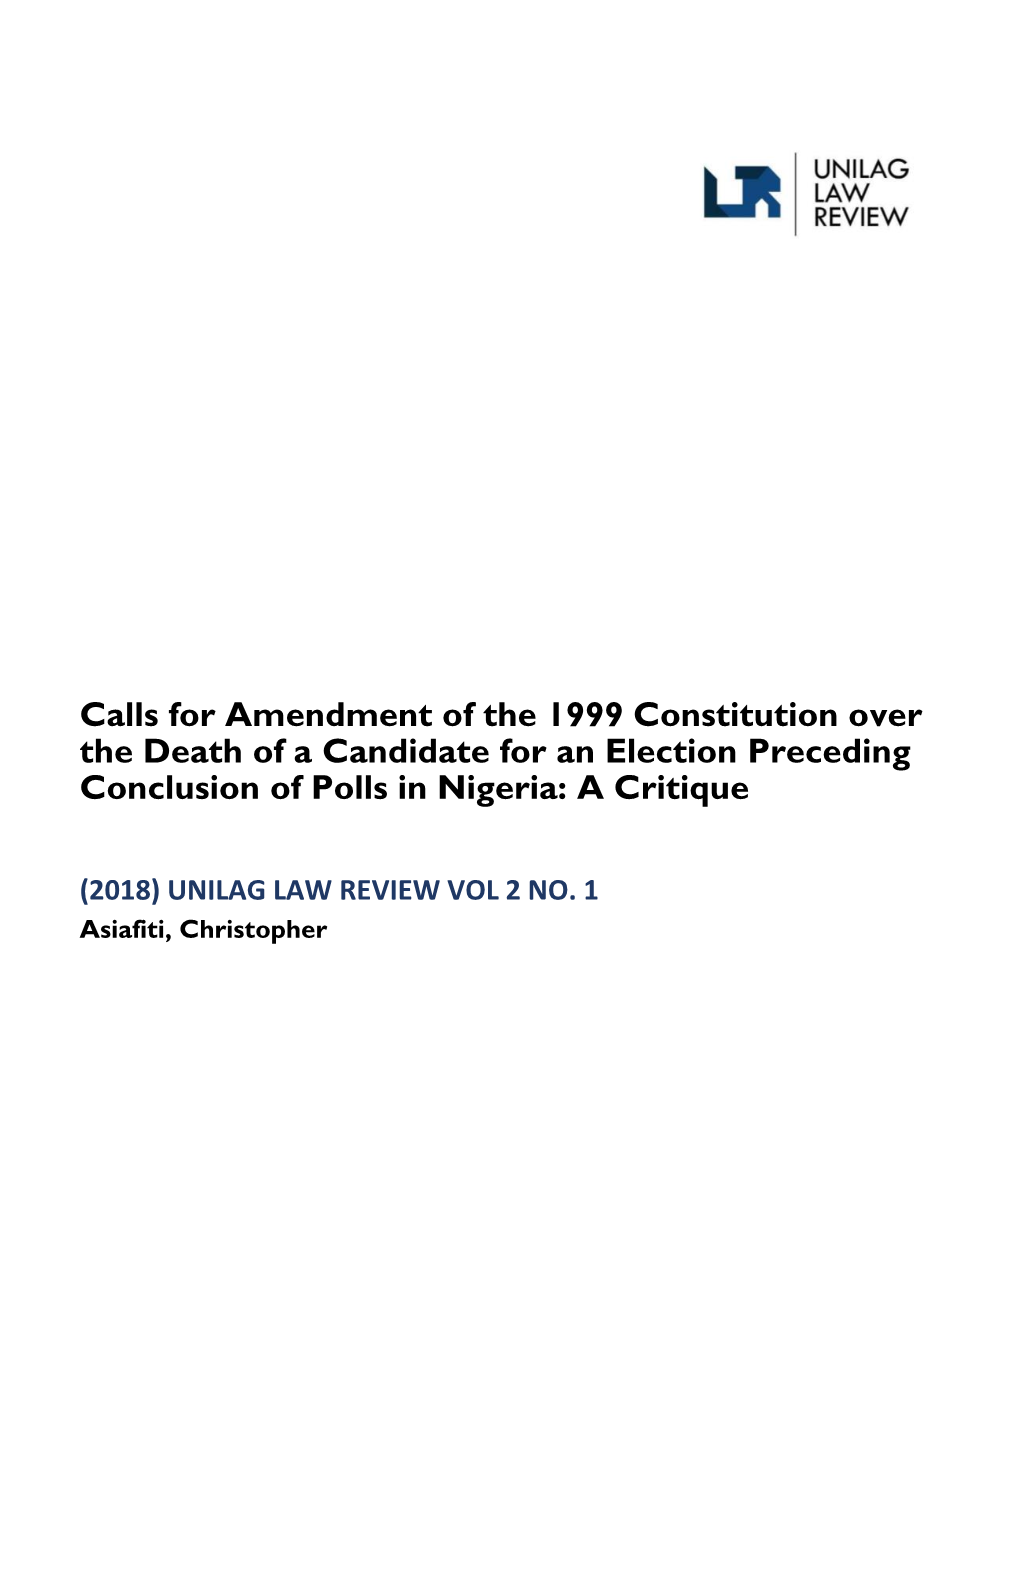 Calls for Amendment of the 1999 Constitution Over the Death of a Candidate for an Election Preceding Conclusion of Polls in Nigeria: a Critique